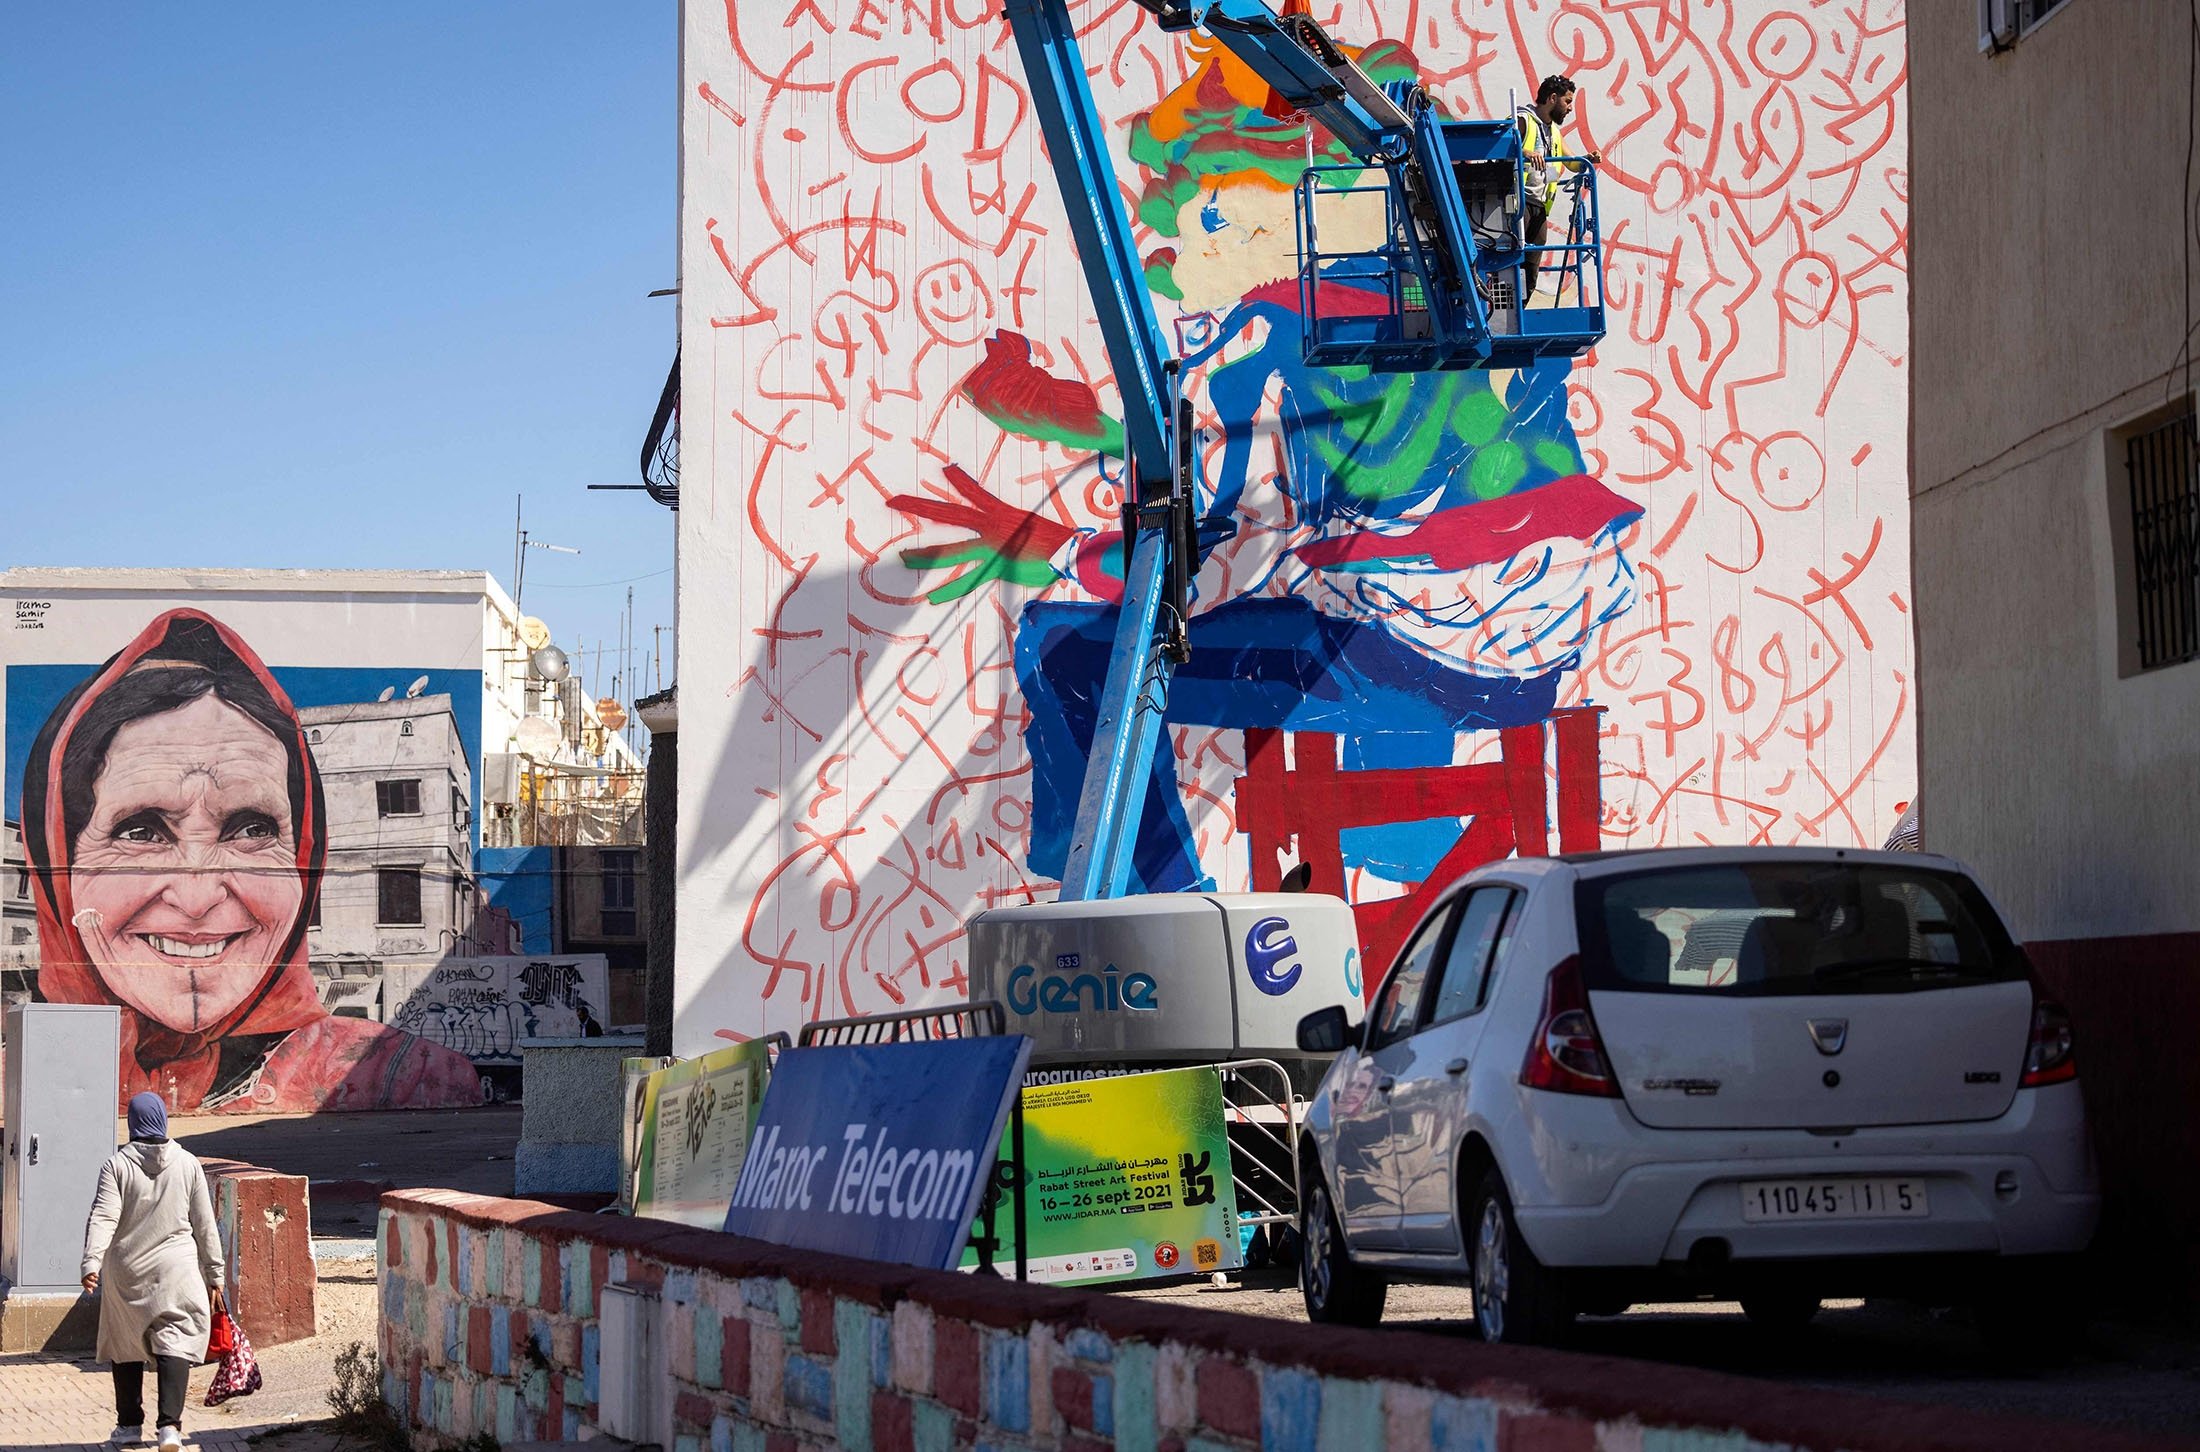 Moroccan street artist Omar Lhamzi works on a mural during the Jidar street art festival in the capital Rabat, Morocco, Sept. 20, 2021. (AFP Photo)